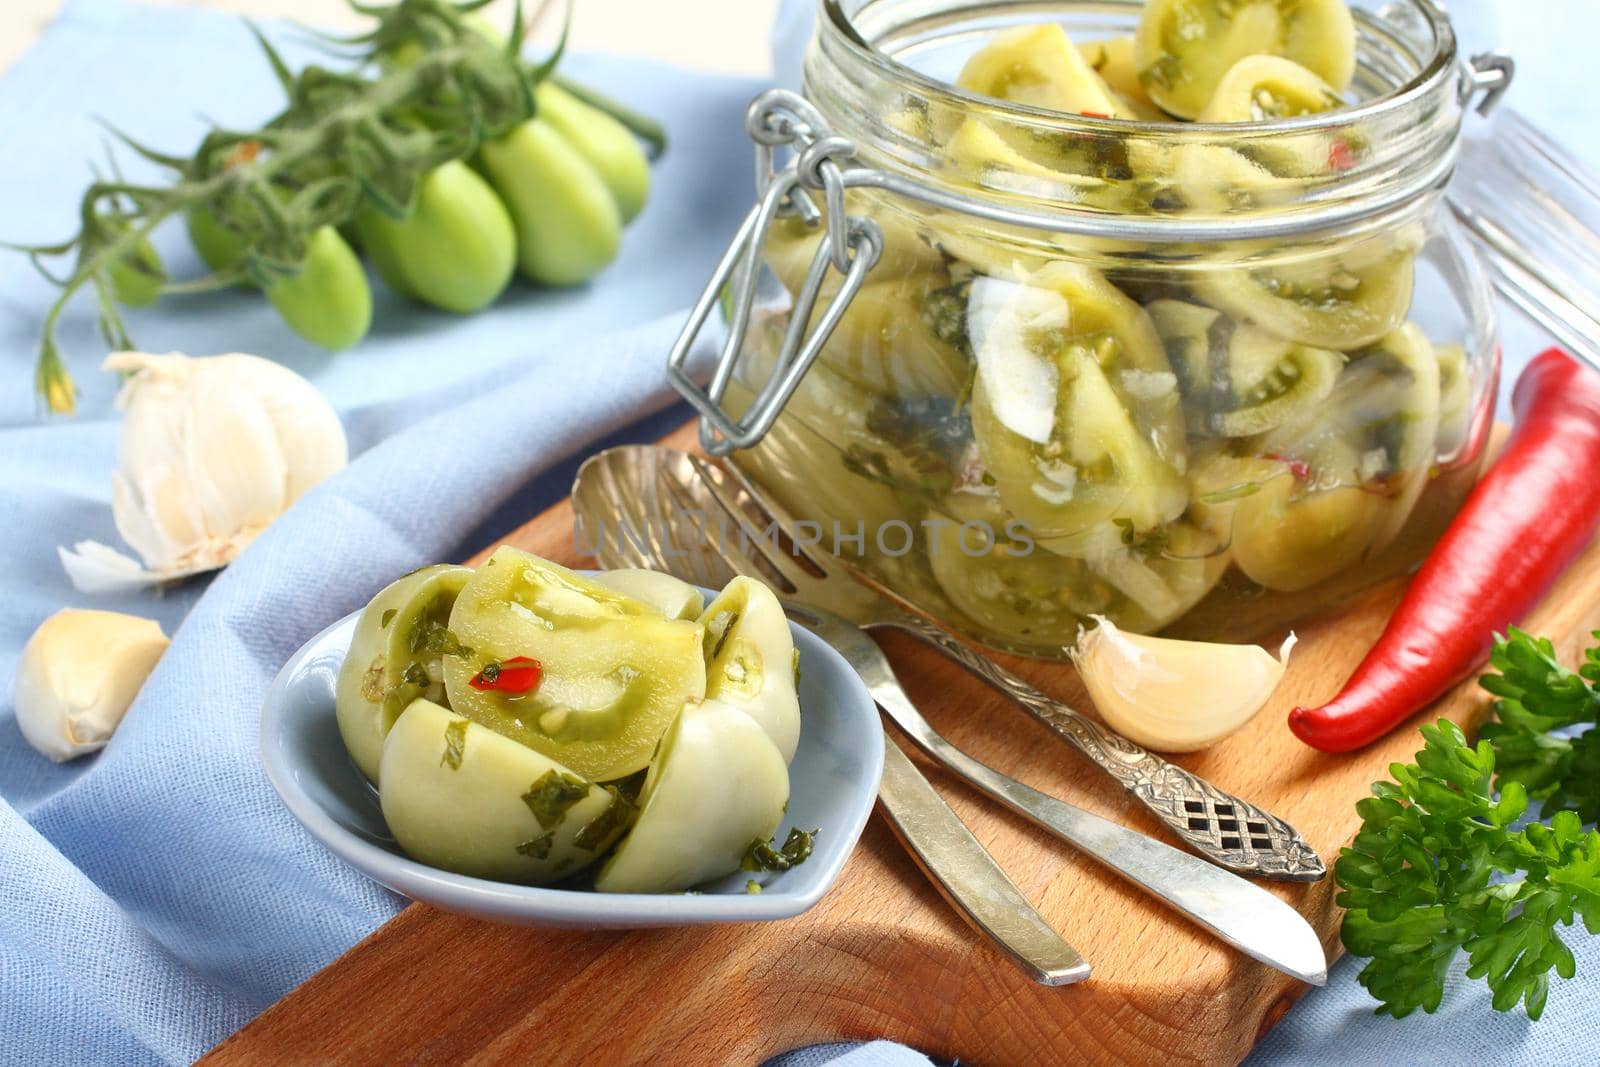 Pickled green tomatoes in blue bowl and in glass jar